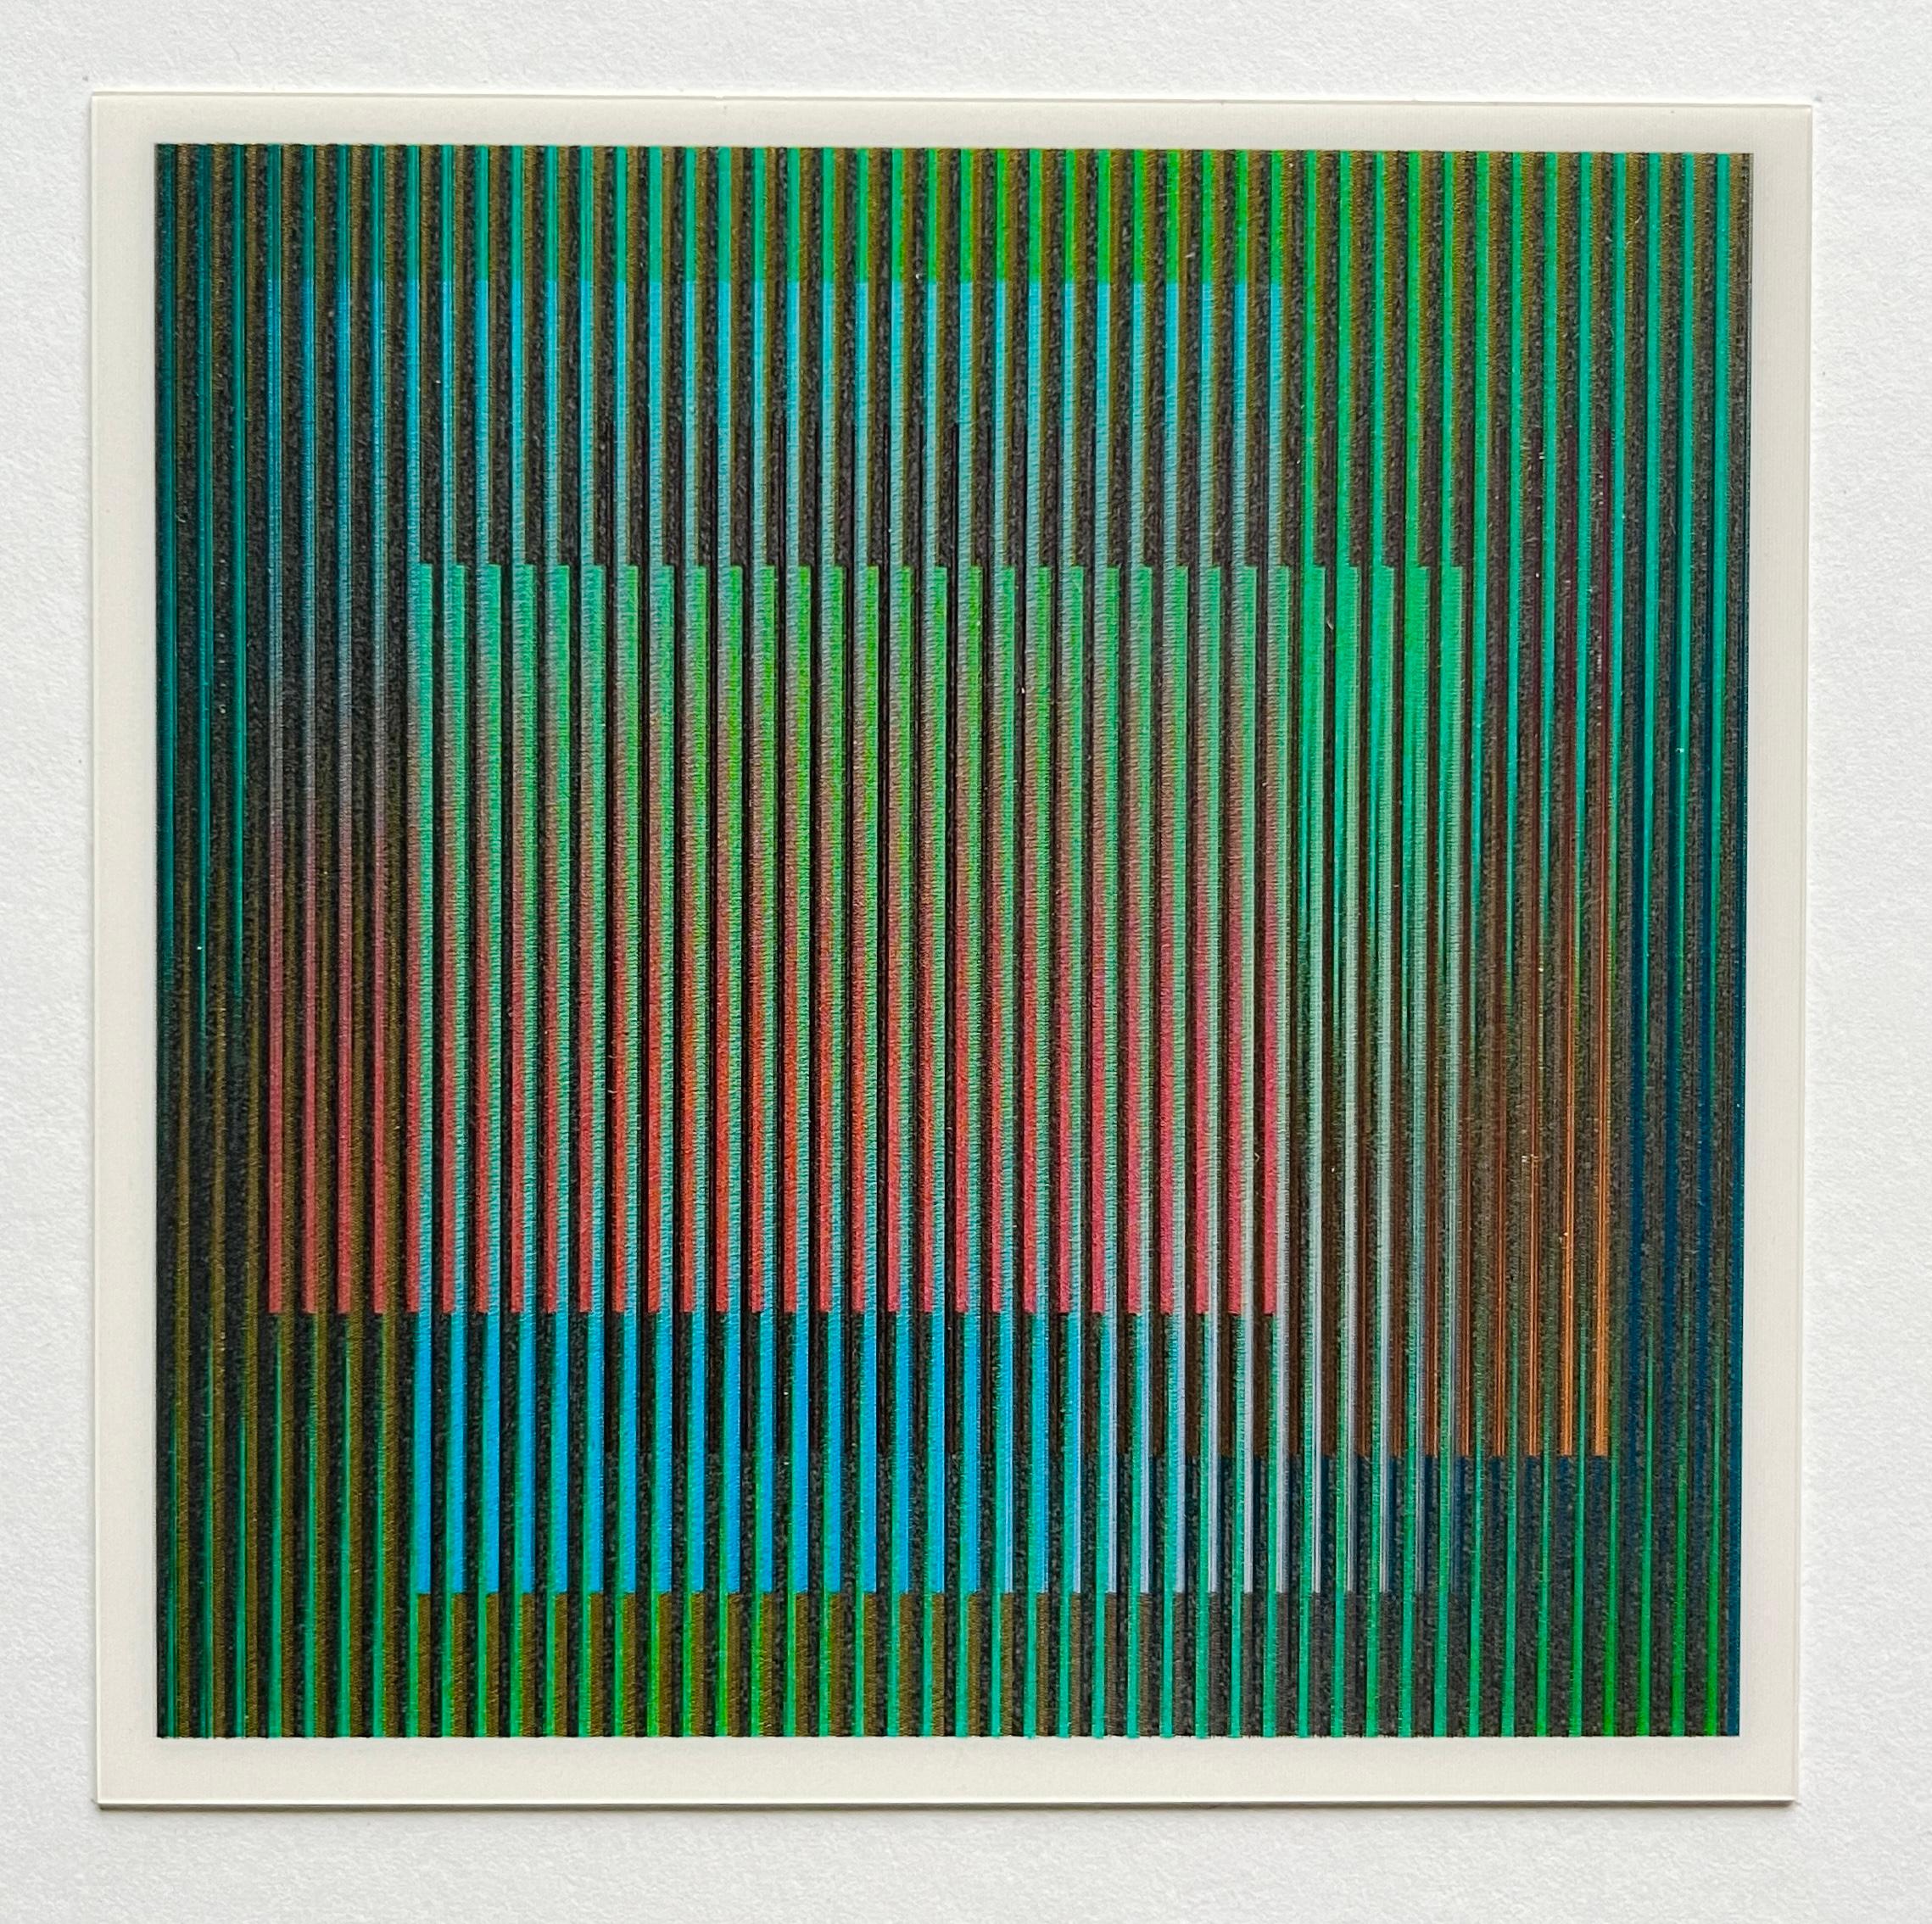 Chromointerference La Difference signed card - Print by Carlos Cruz-Diez